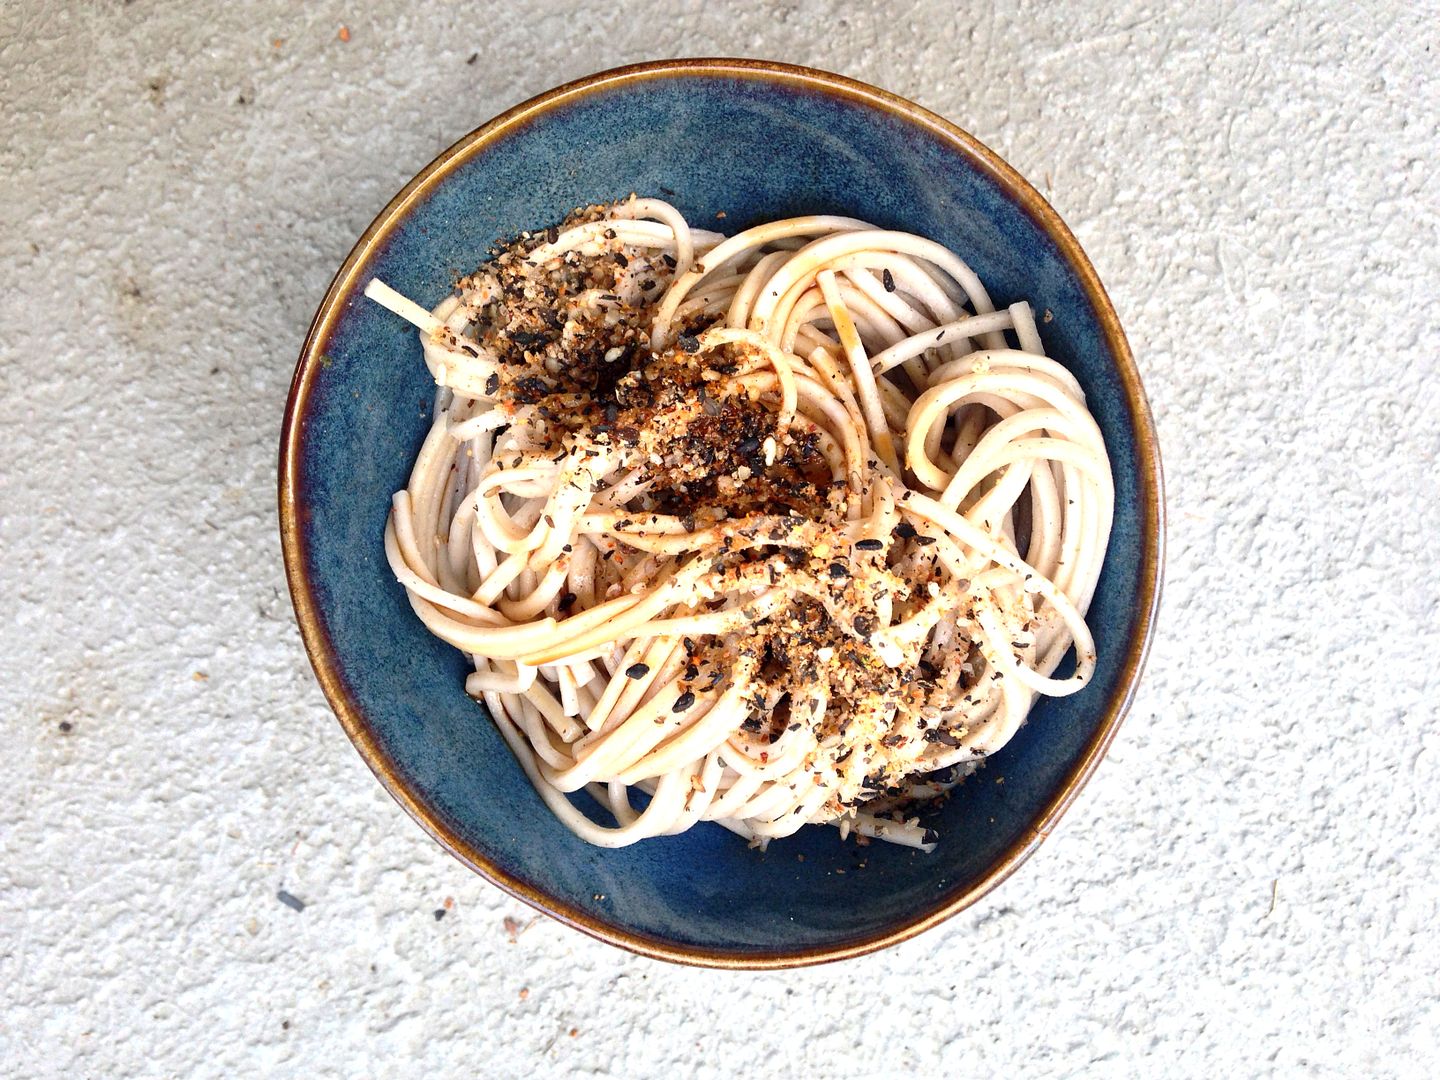 Raw Spice Bar spice of the month club comes with recipes so you know exactly how to use your new blends: Soba Noodles with Japanese Gomasio